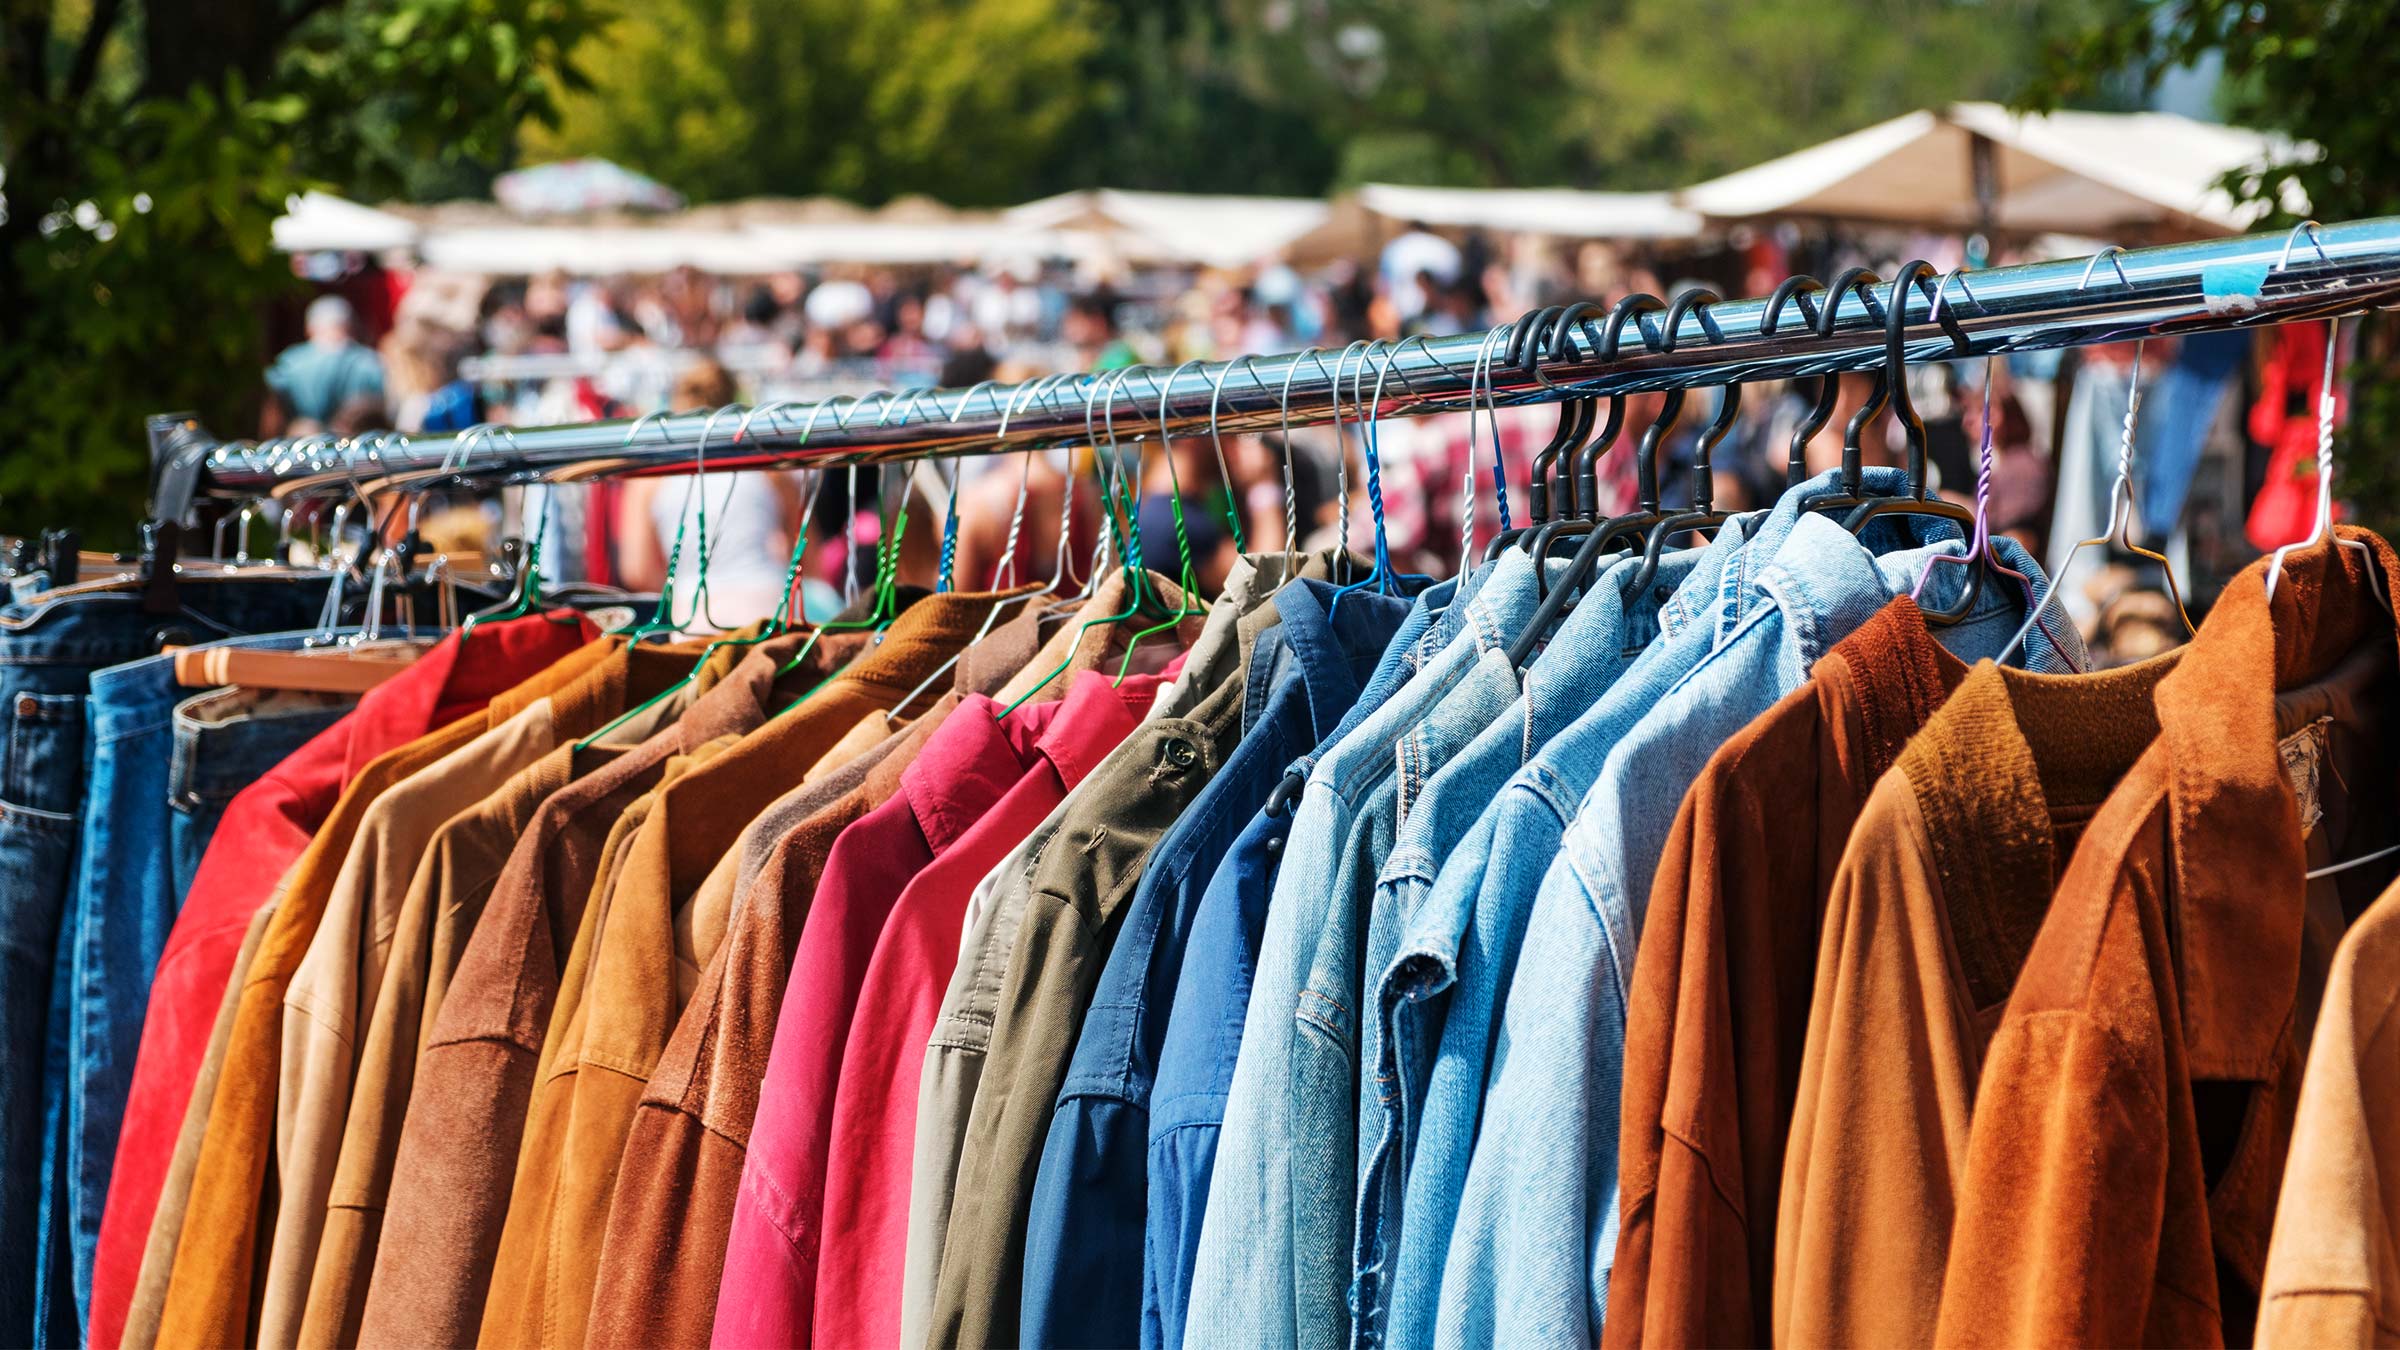 The resale revolution: we’re seeing the rise of second-hand first hand